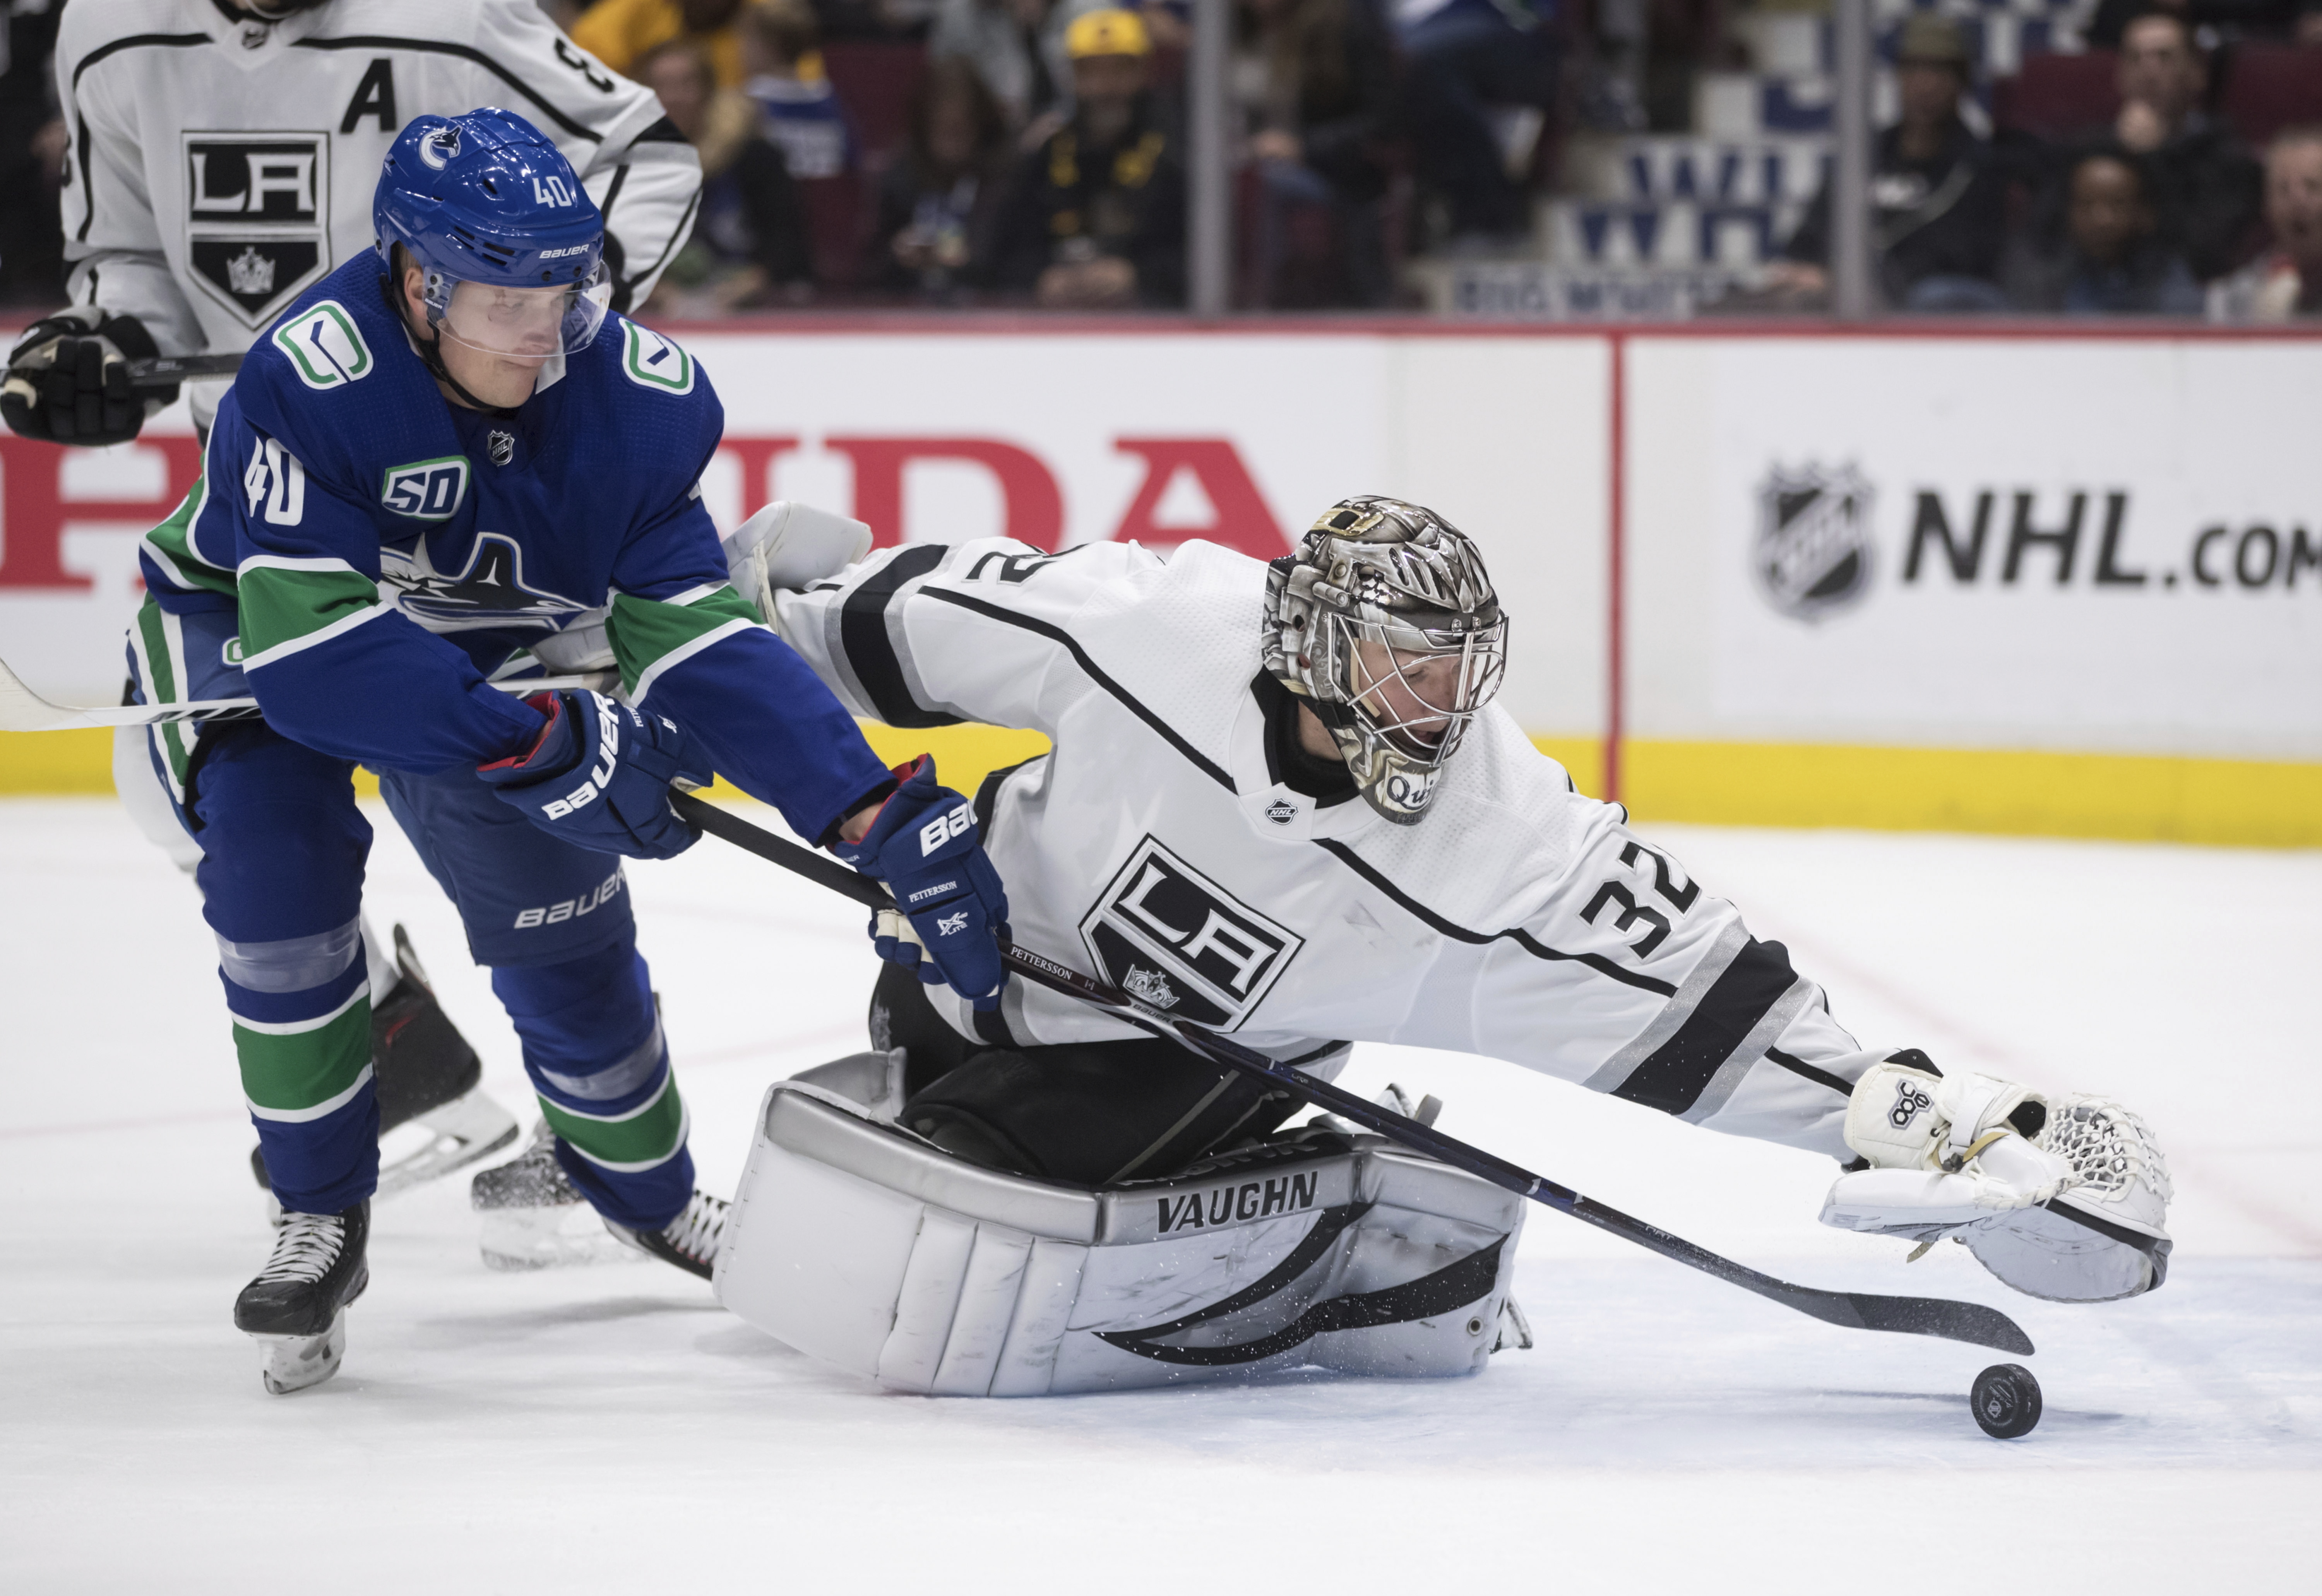 Miller finishes with 4 points, Canucks beat Kings 8-2